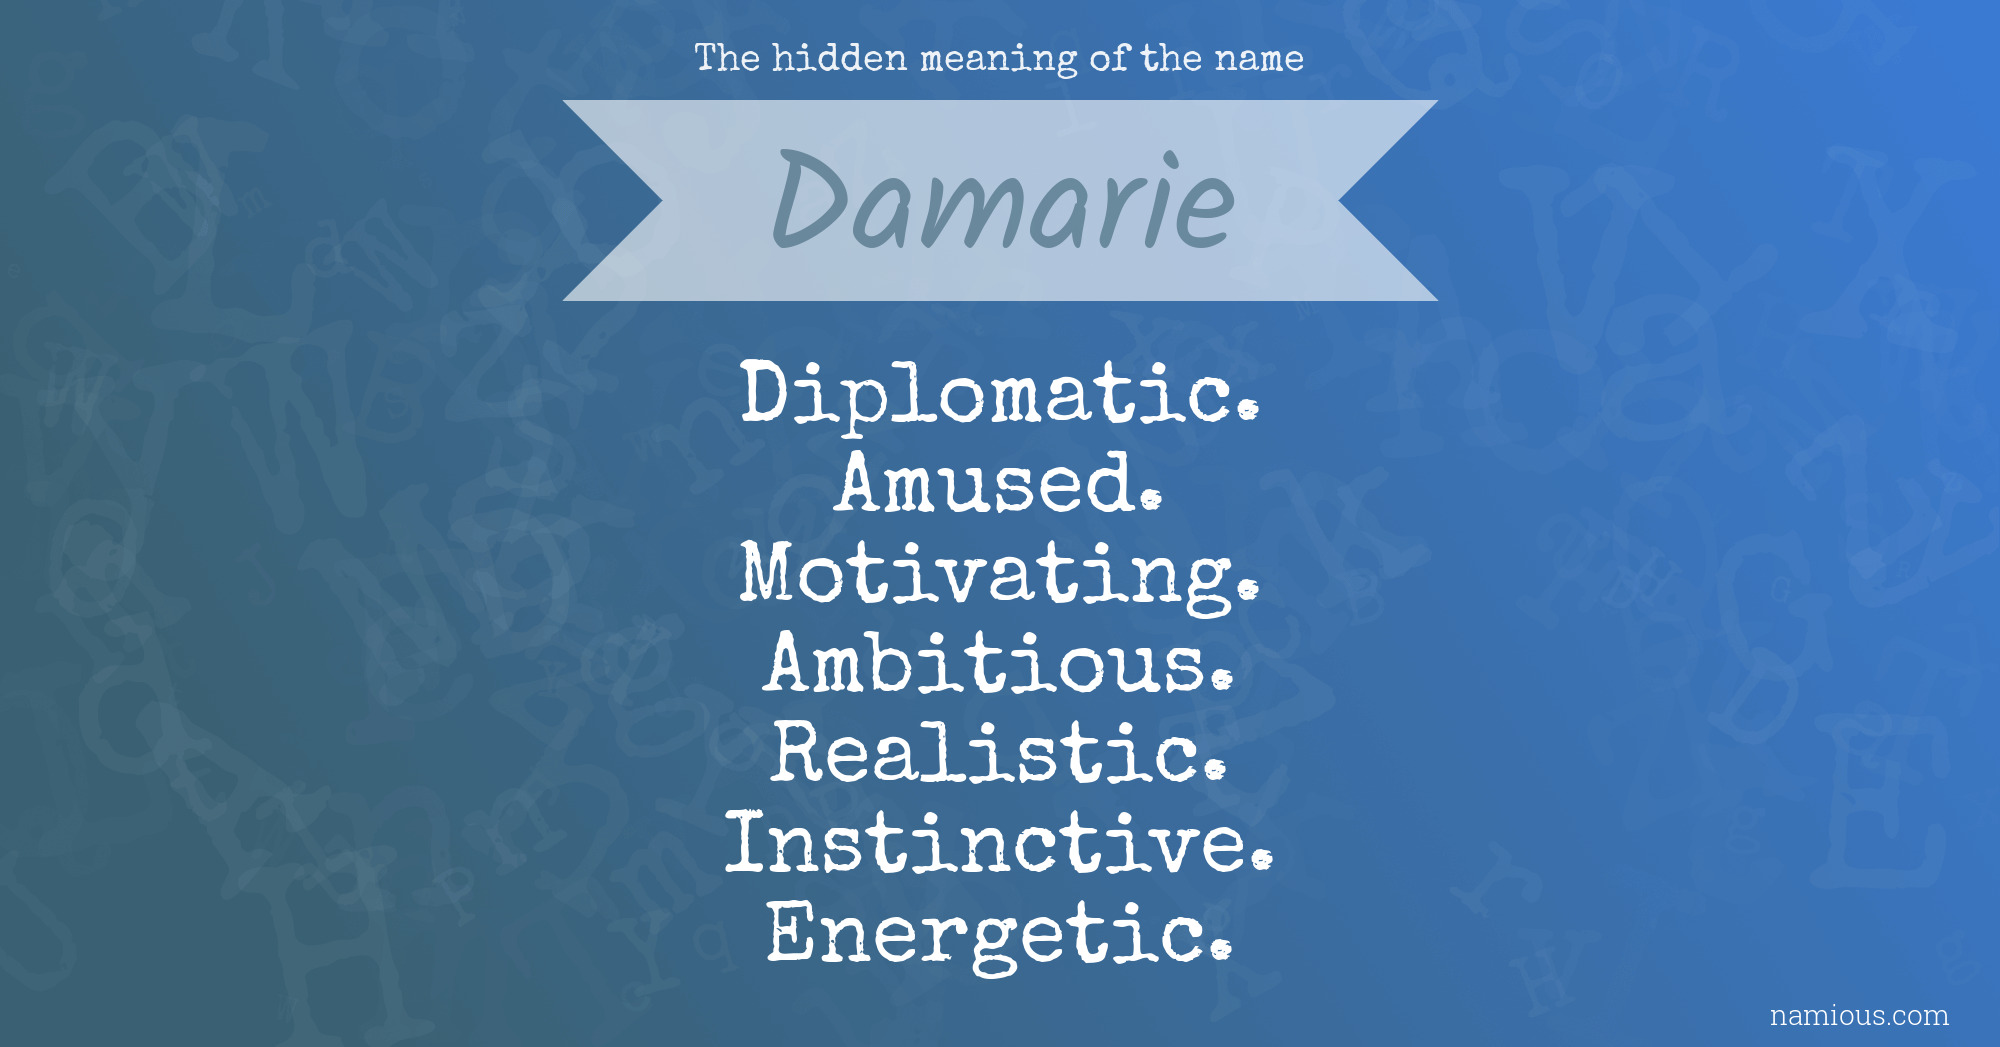 The hidden meaning of the name Damarie